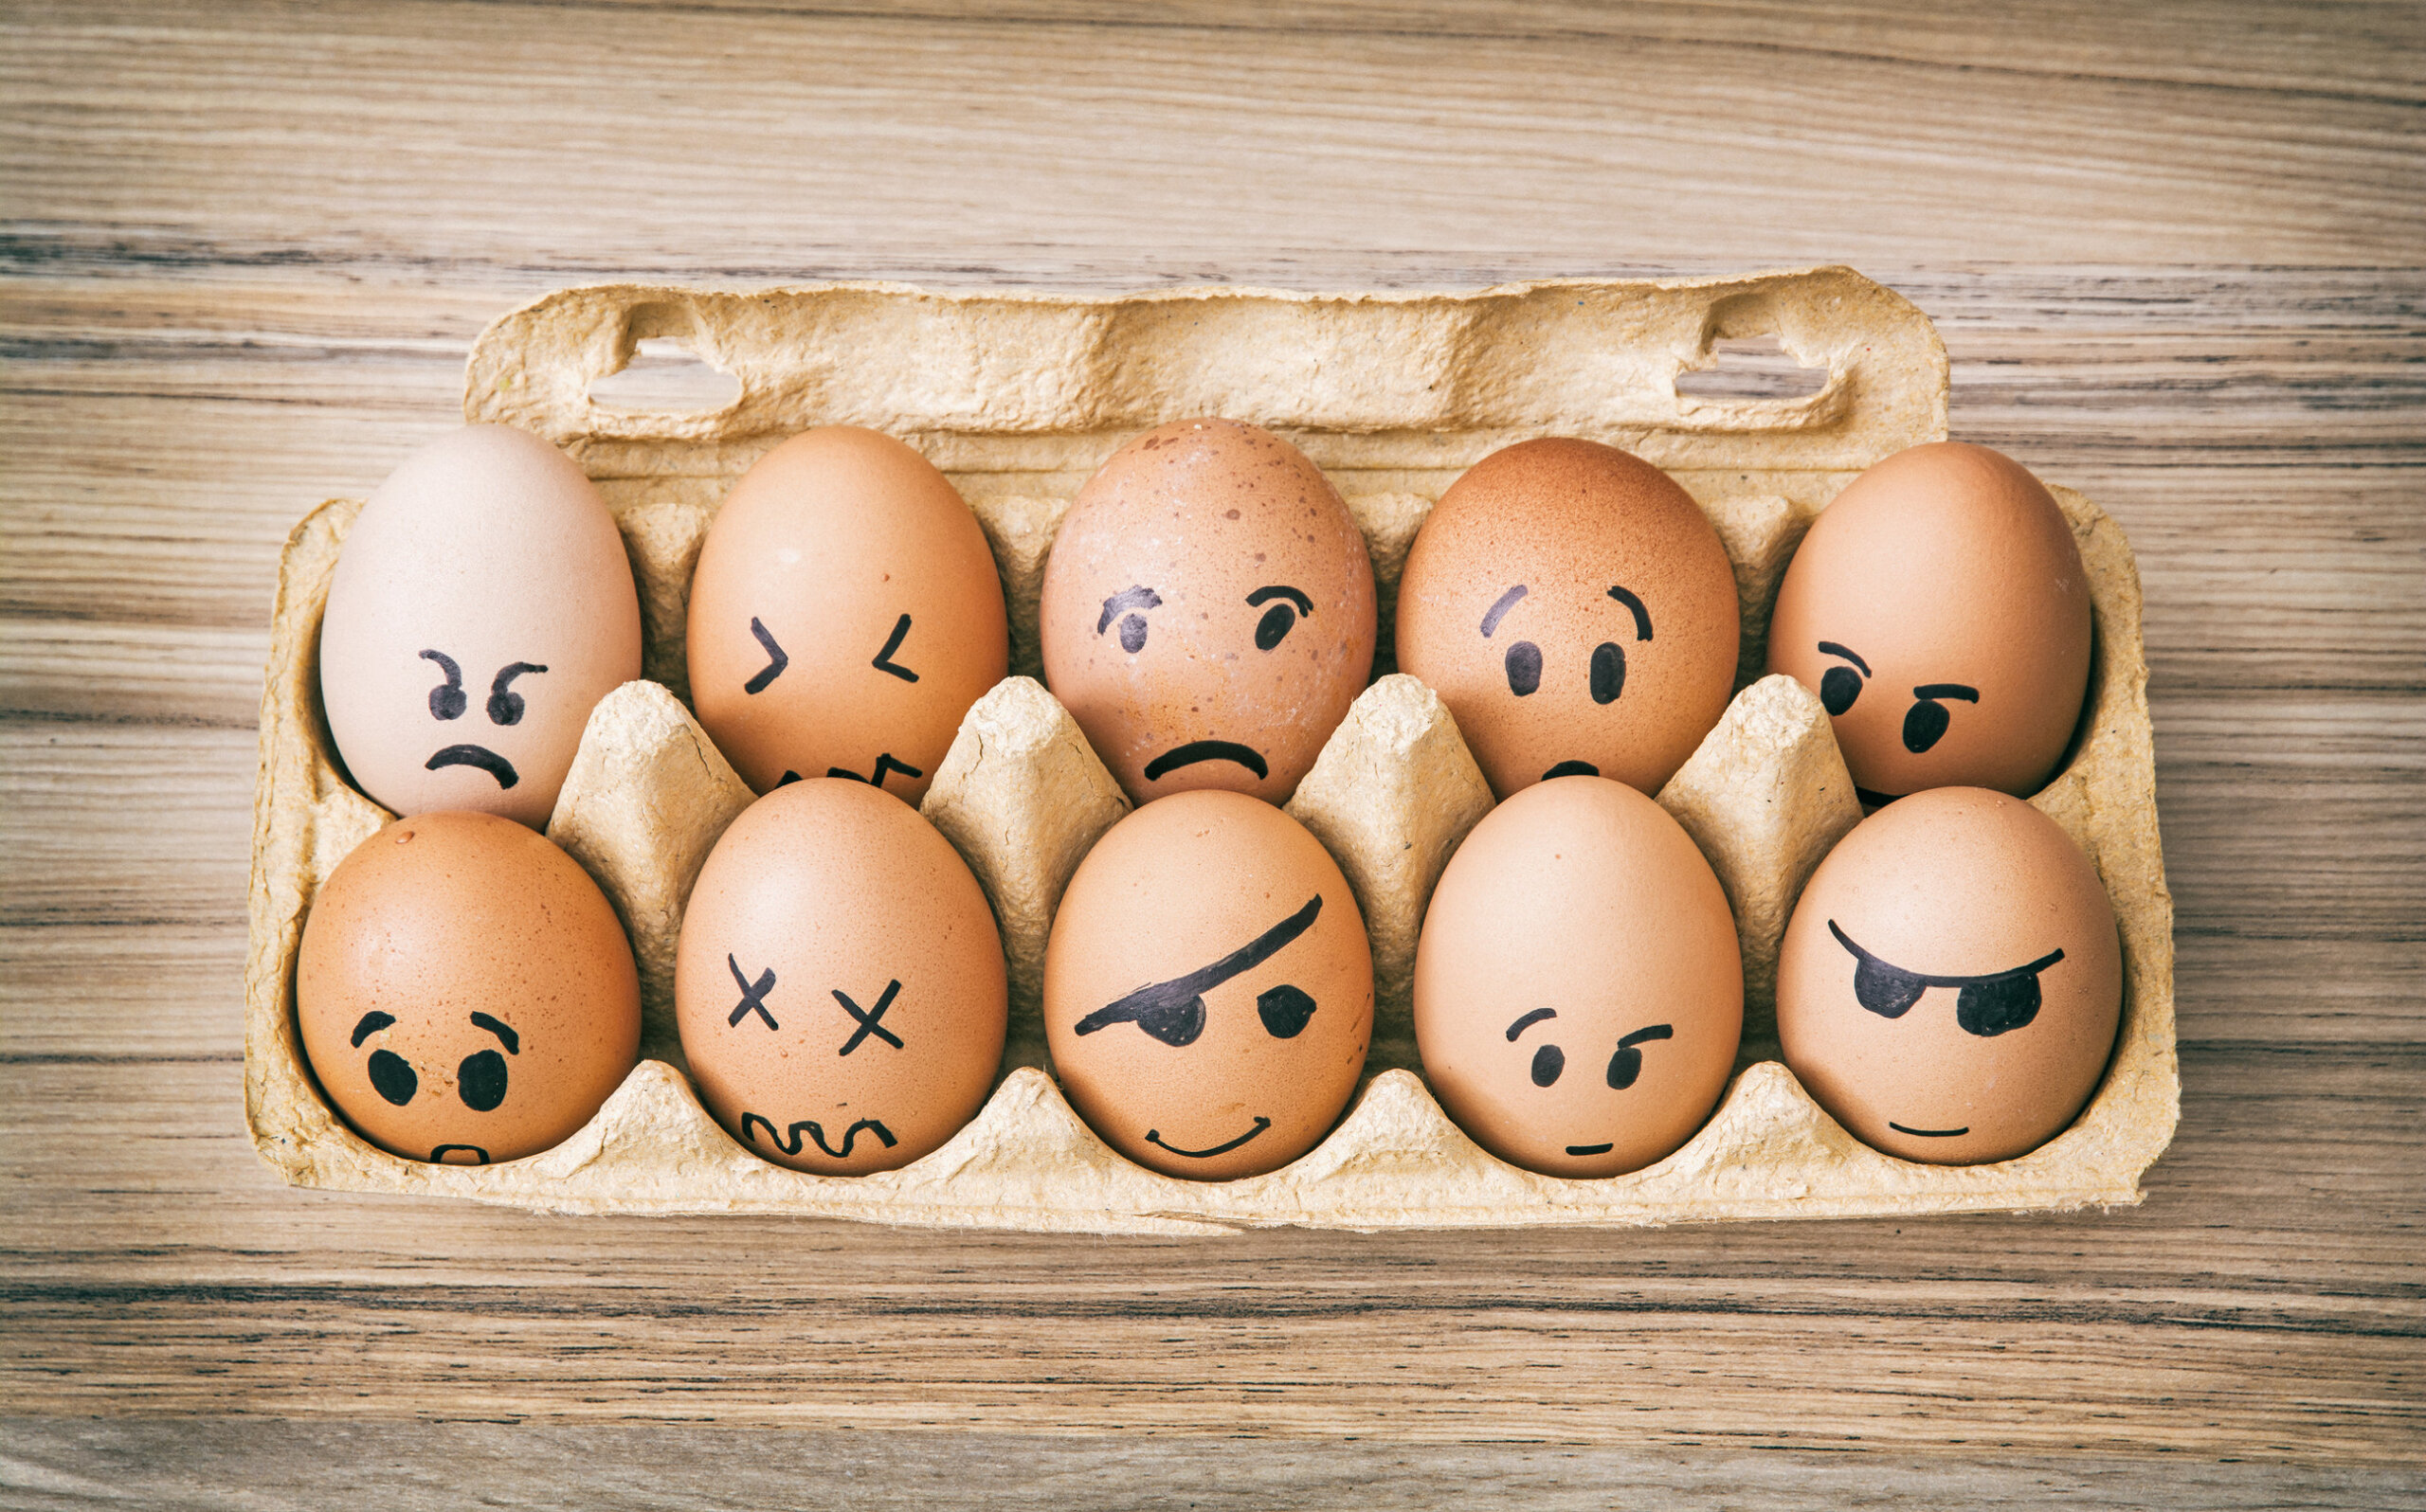 Eggs with faces.